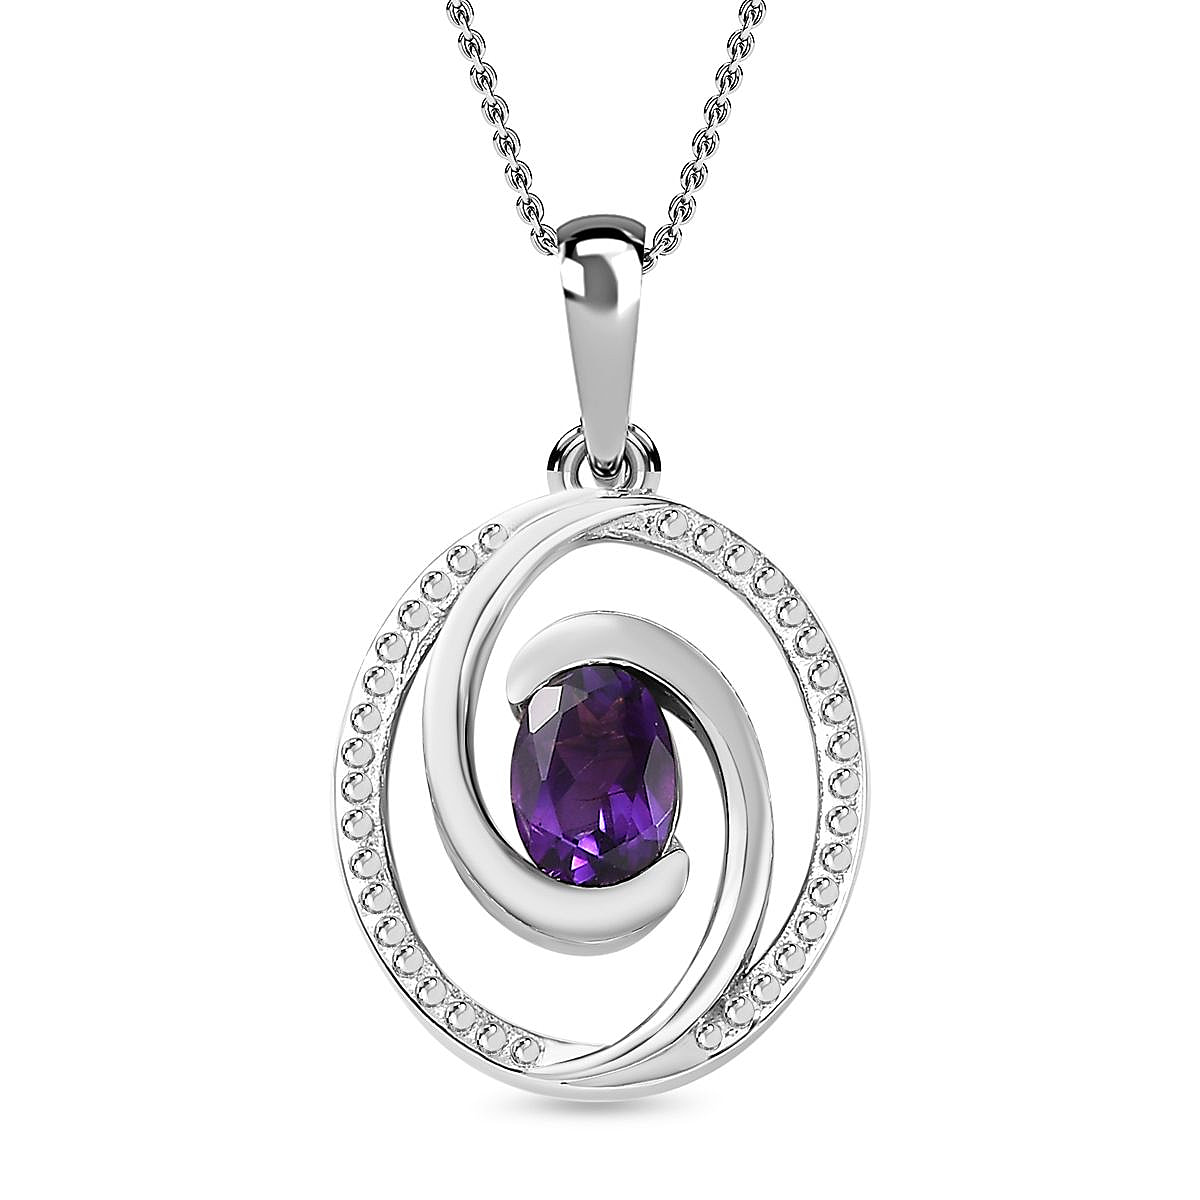 Moroccan Amethyst Solitaire Pendant with Chain (Size 20) in Platinum Overlay Sterling Silver, Silver Wt 5.44 GM